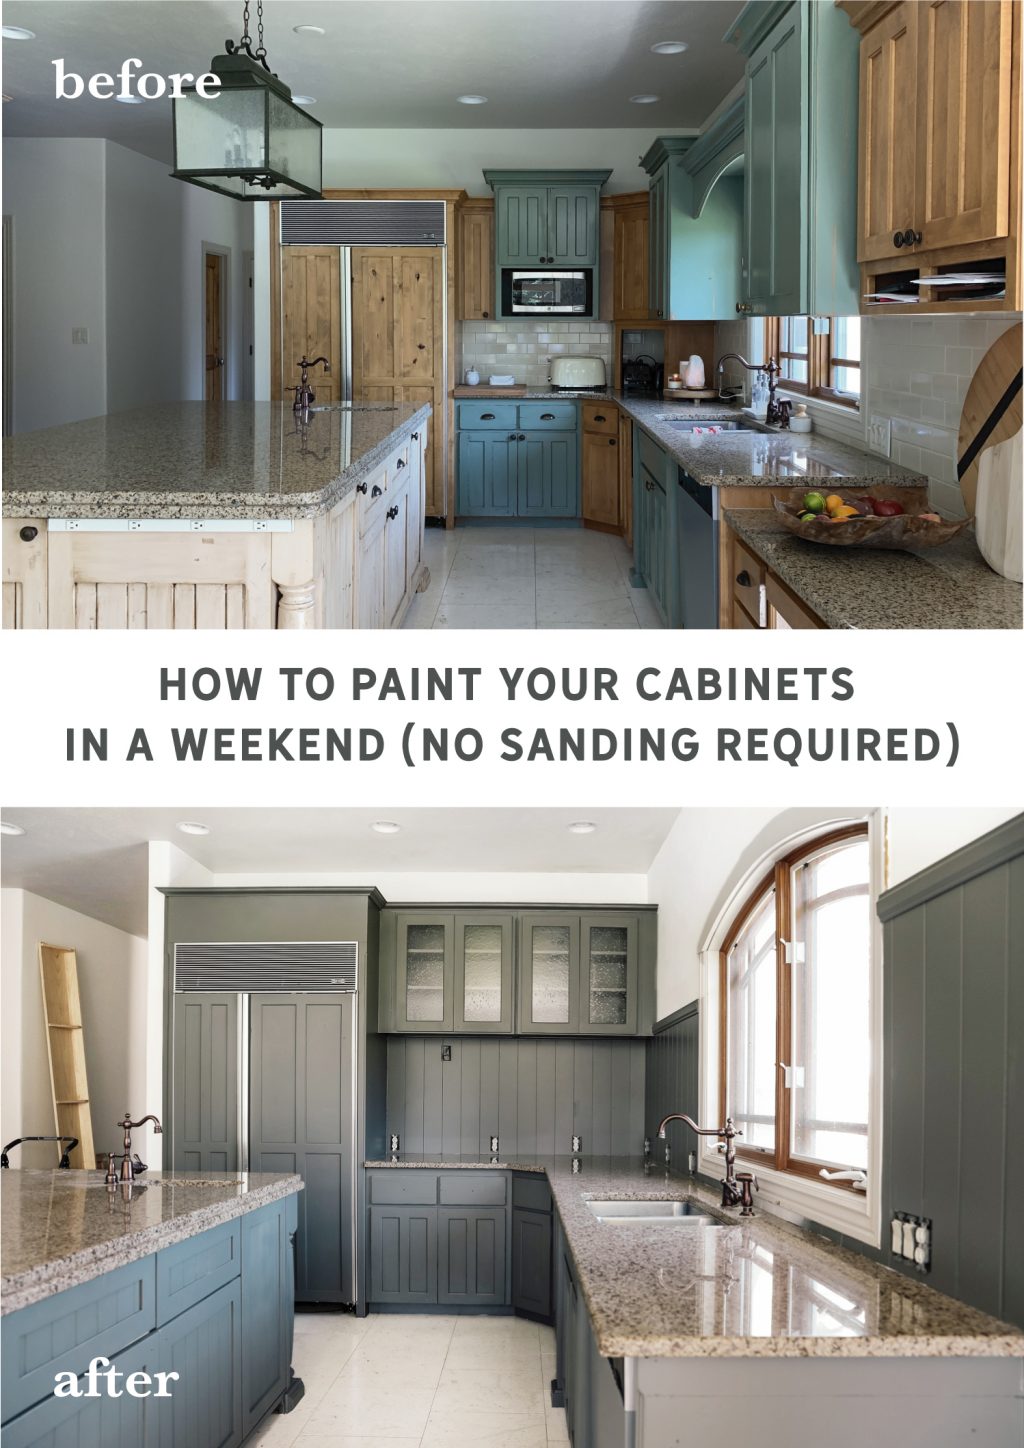 How To Paint Your Cabinets In A Weekend, Best Do It Yourself Kitchen Cabinet Paint